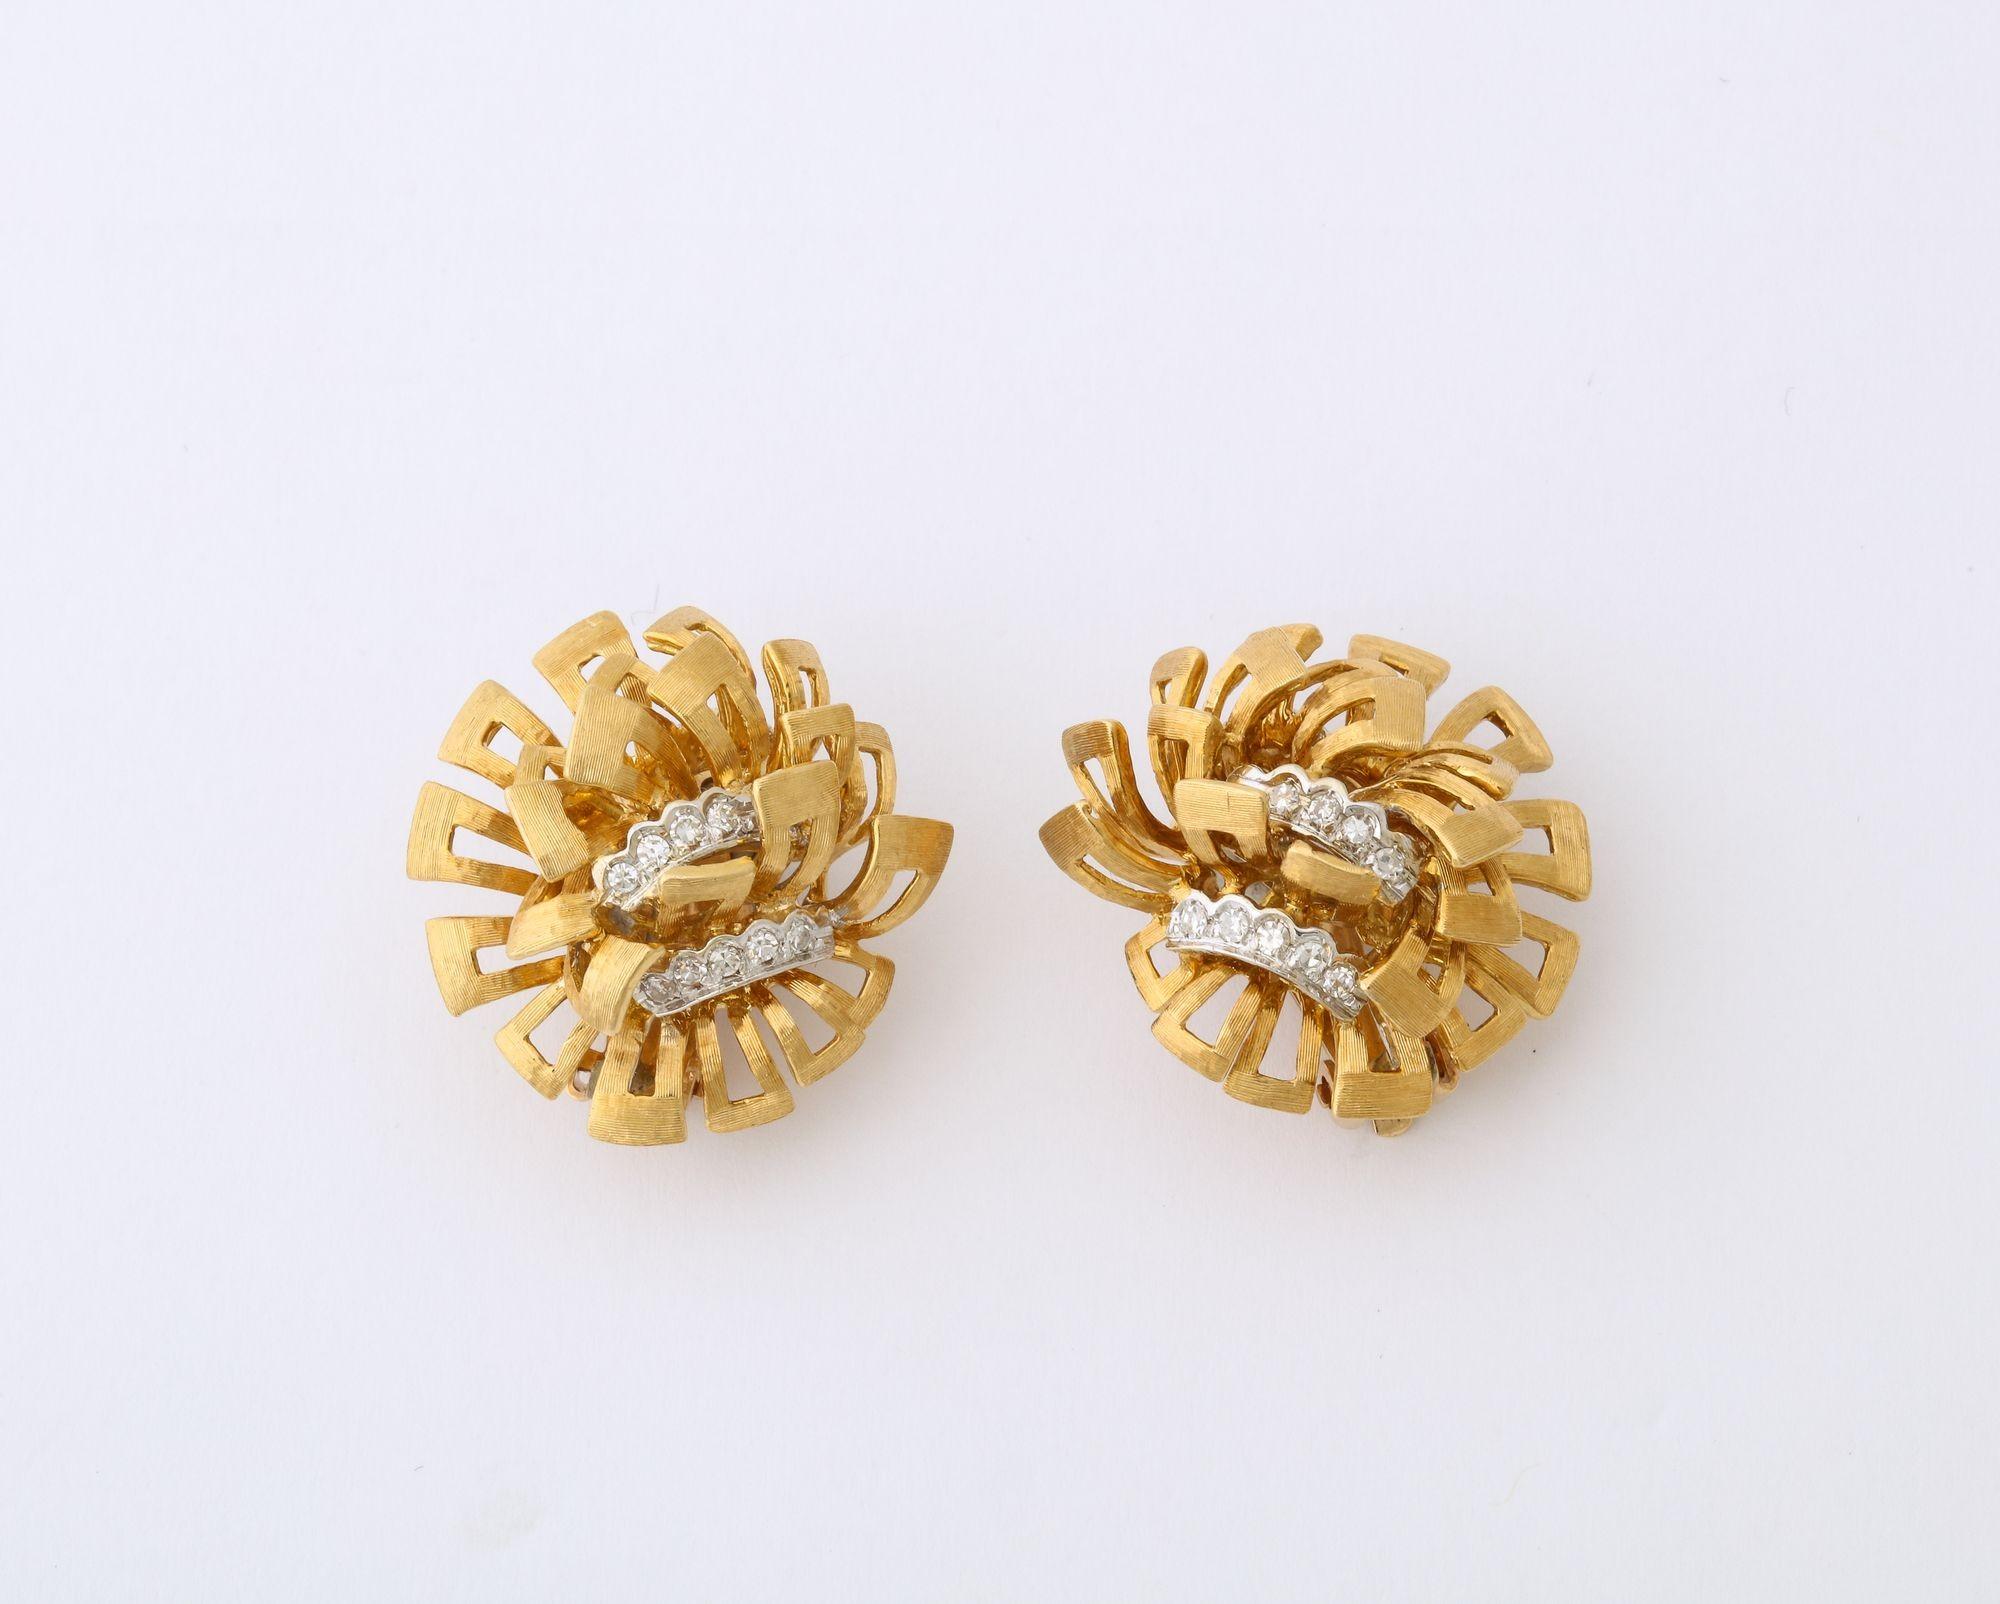 Vintage 18K yellow and white gold diamond cluster floral motif clip earrings, set with approx: 1.90 cttw. Old Miners and Old European-cut diamonds; color: H-I, clarity: SI1 - SI2. Marked: 